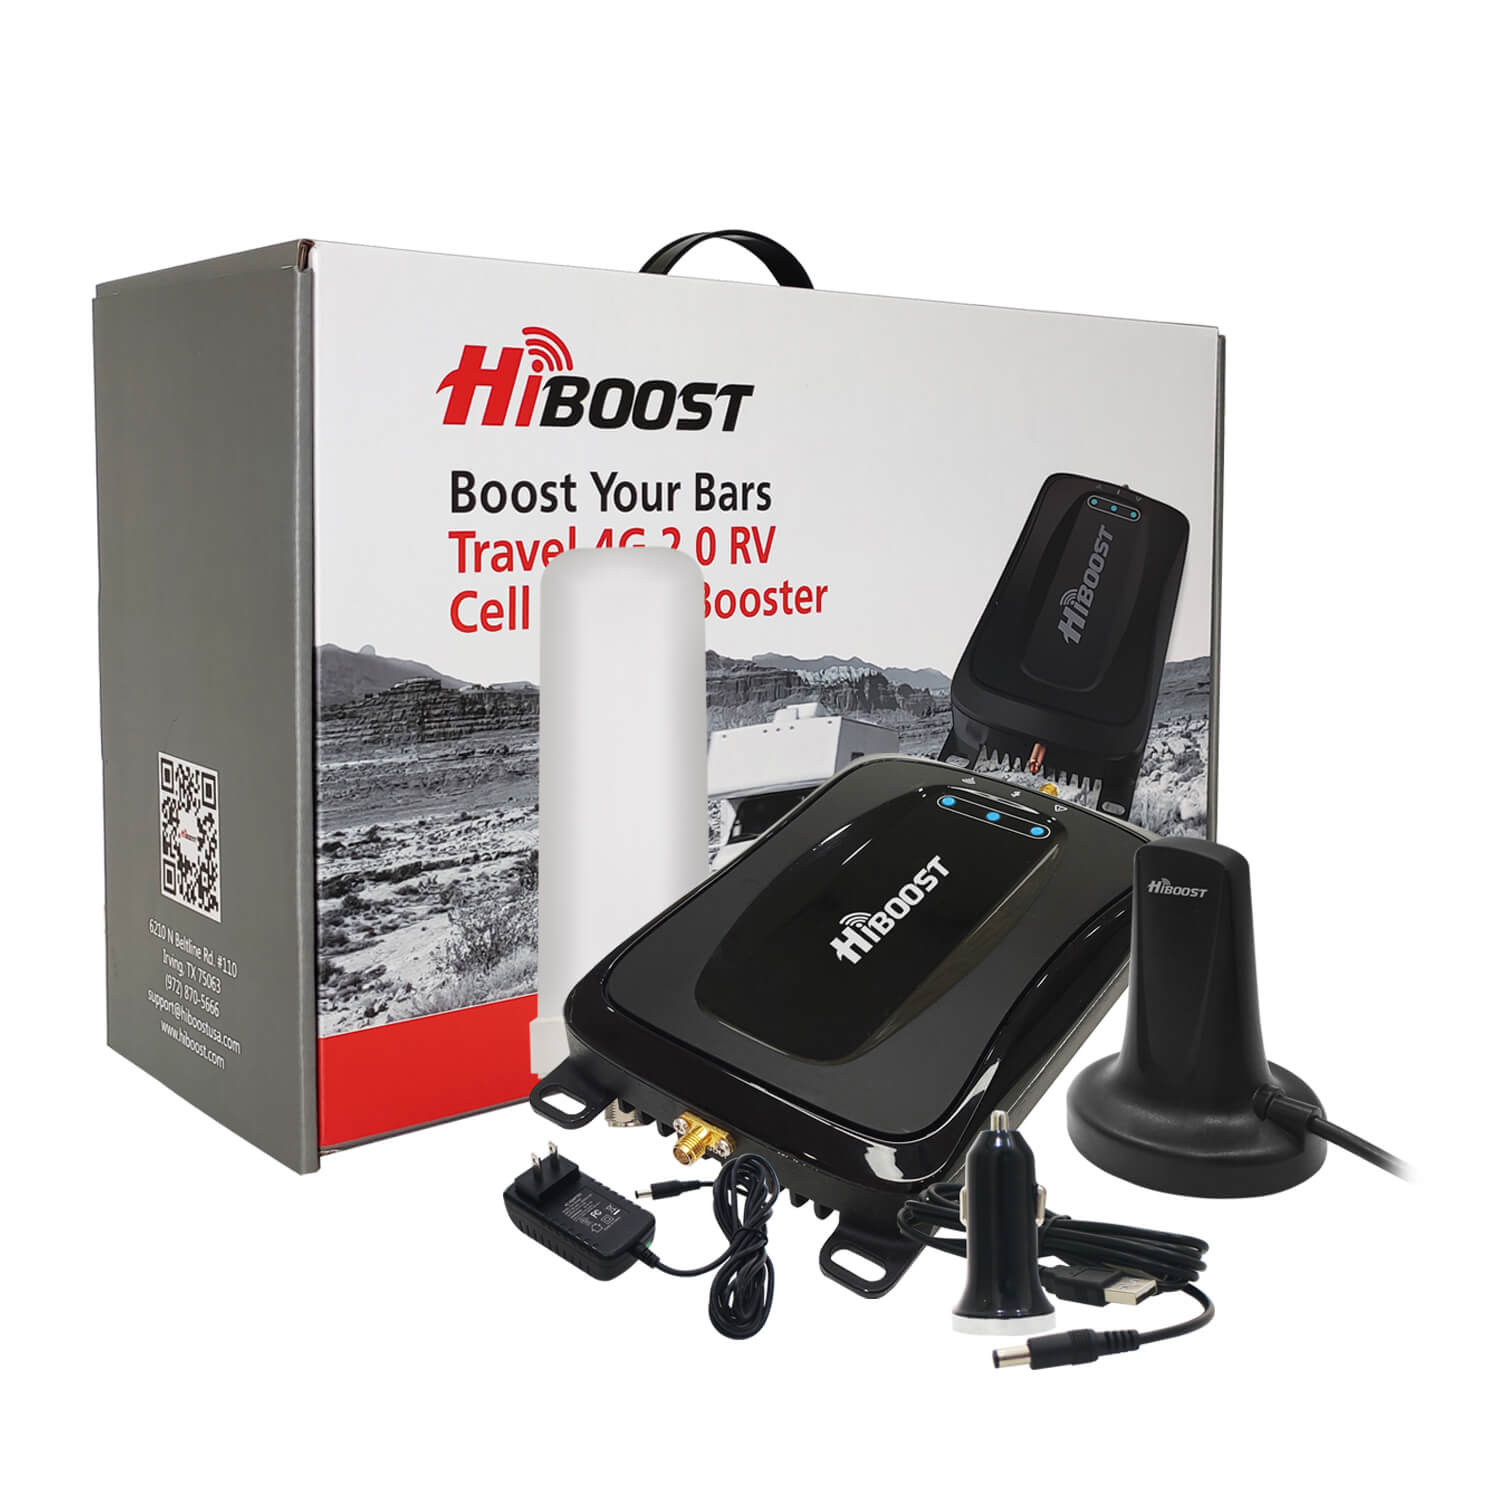 HiBoost Cell Phone Signal Booster for RV Trucks Vans, Travel 4G 2.0 RV for RV Truck Van Signal Booster, AT&T T-Mobile Sprint Verizon RV Cell Phone Amplifier